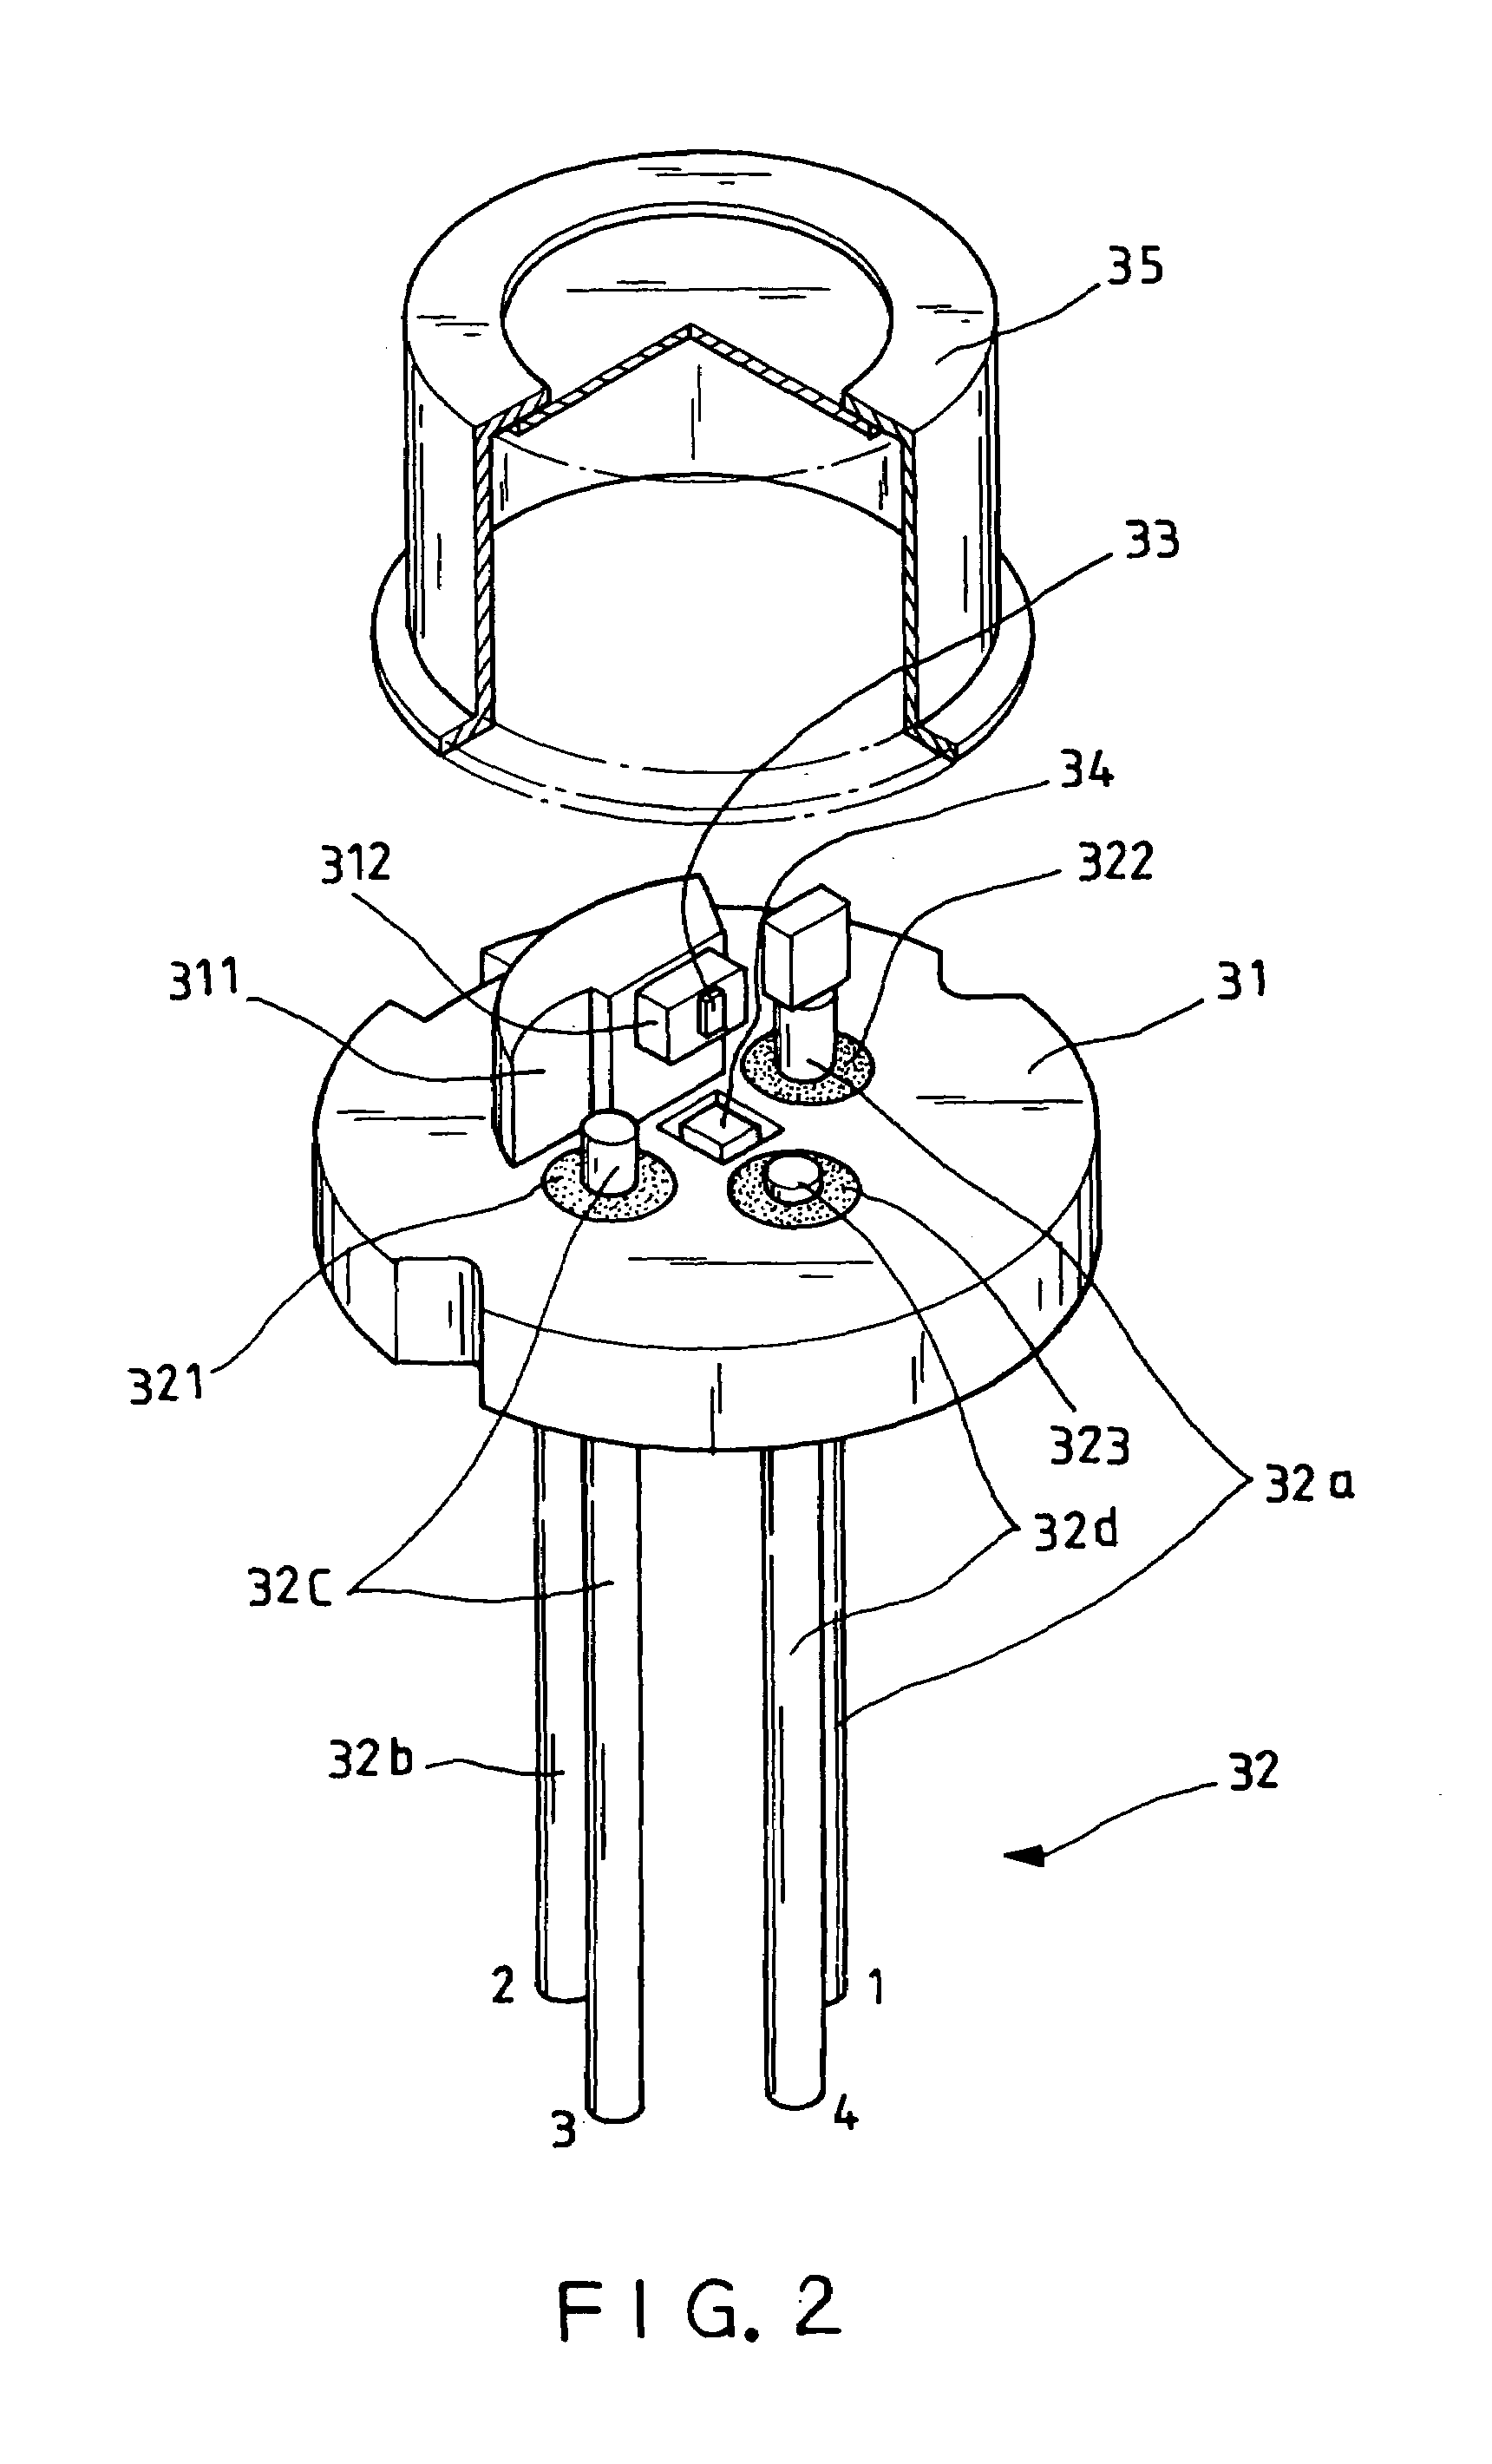 Laser diode module with a built-in high-frequency modulation IC